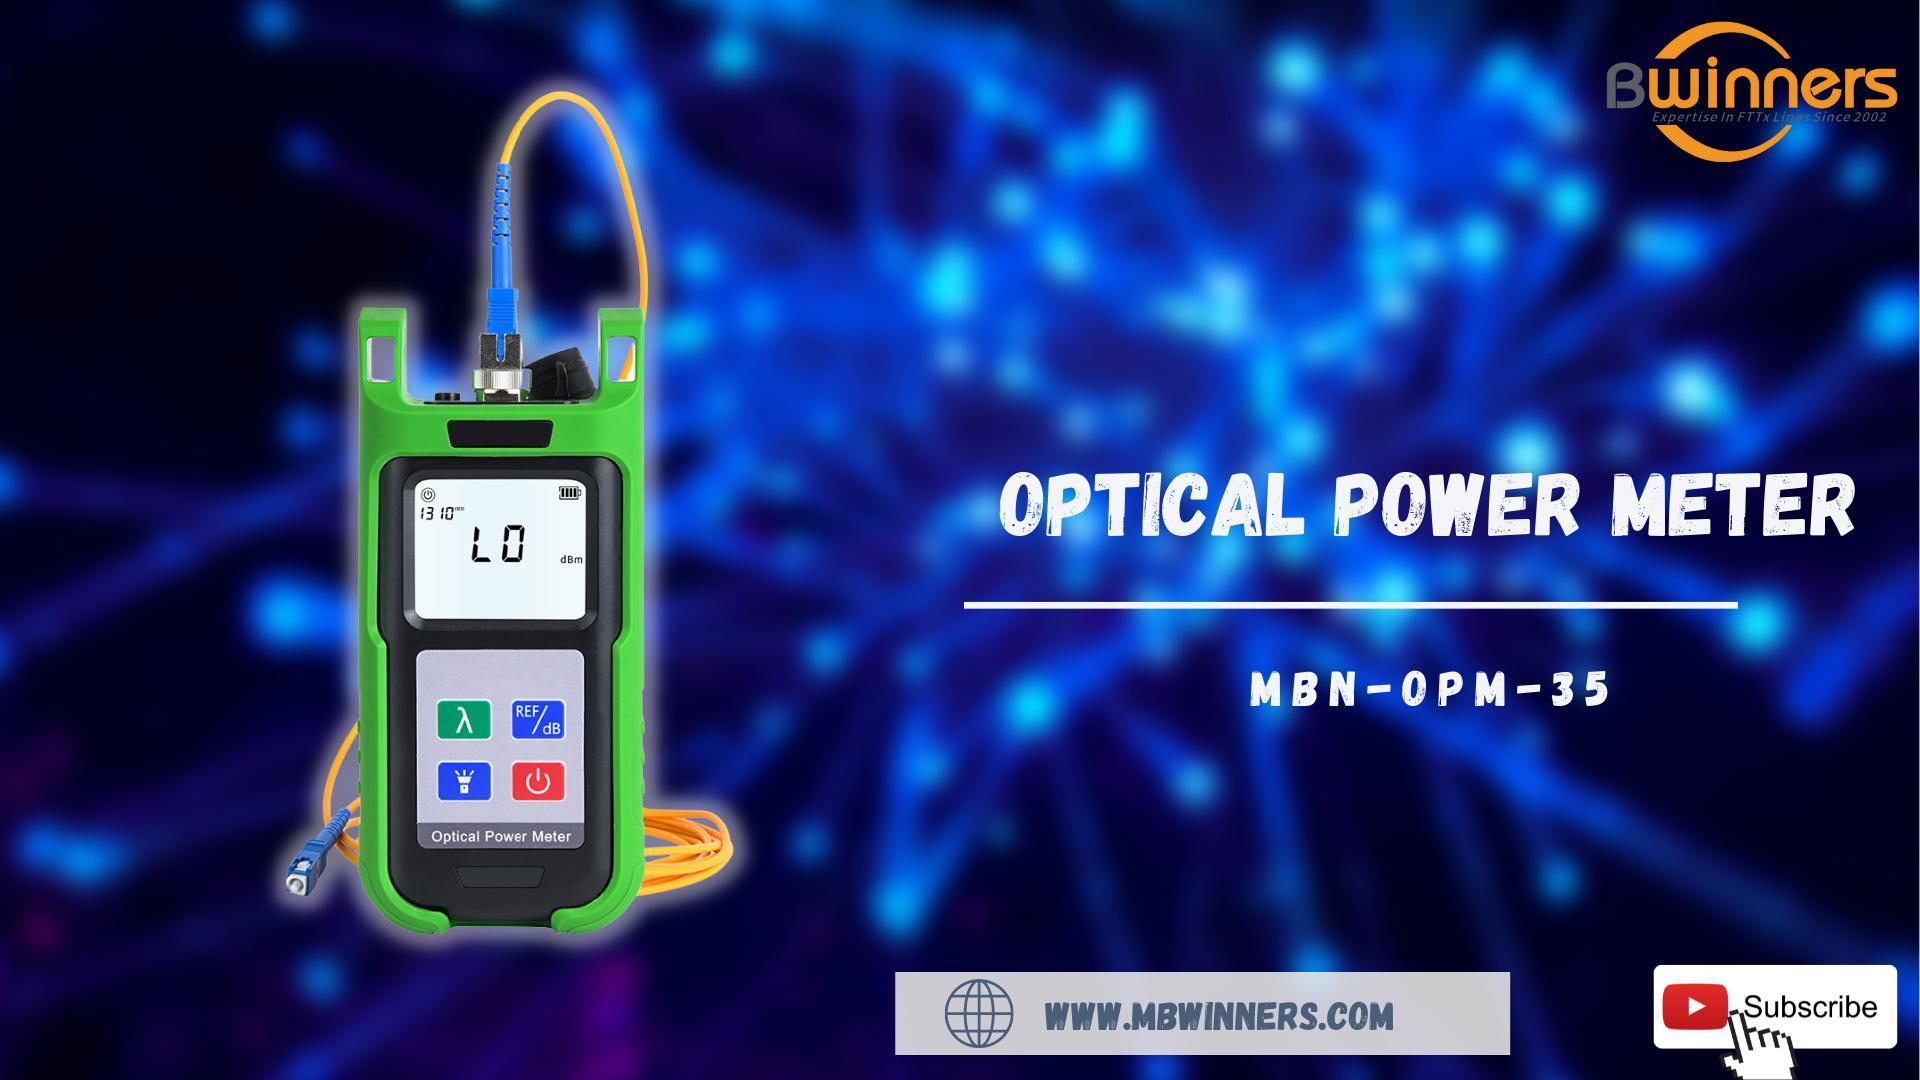 MBN-OPM-35 Optical Power Meter